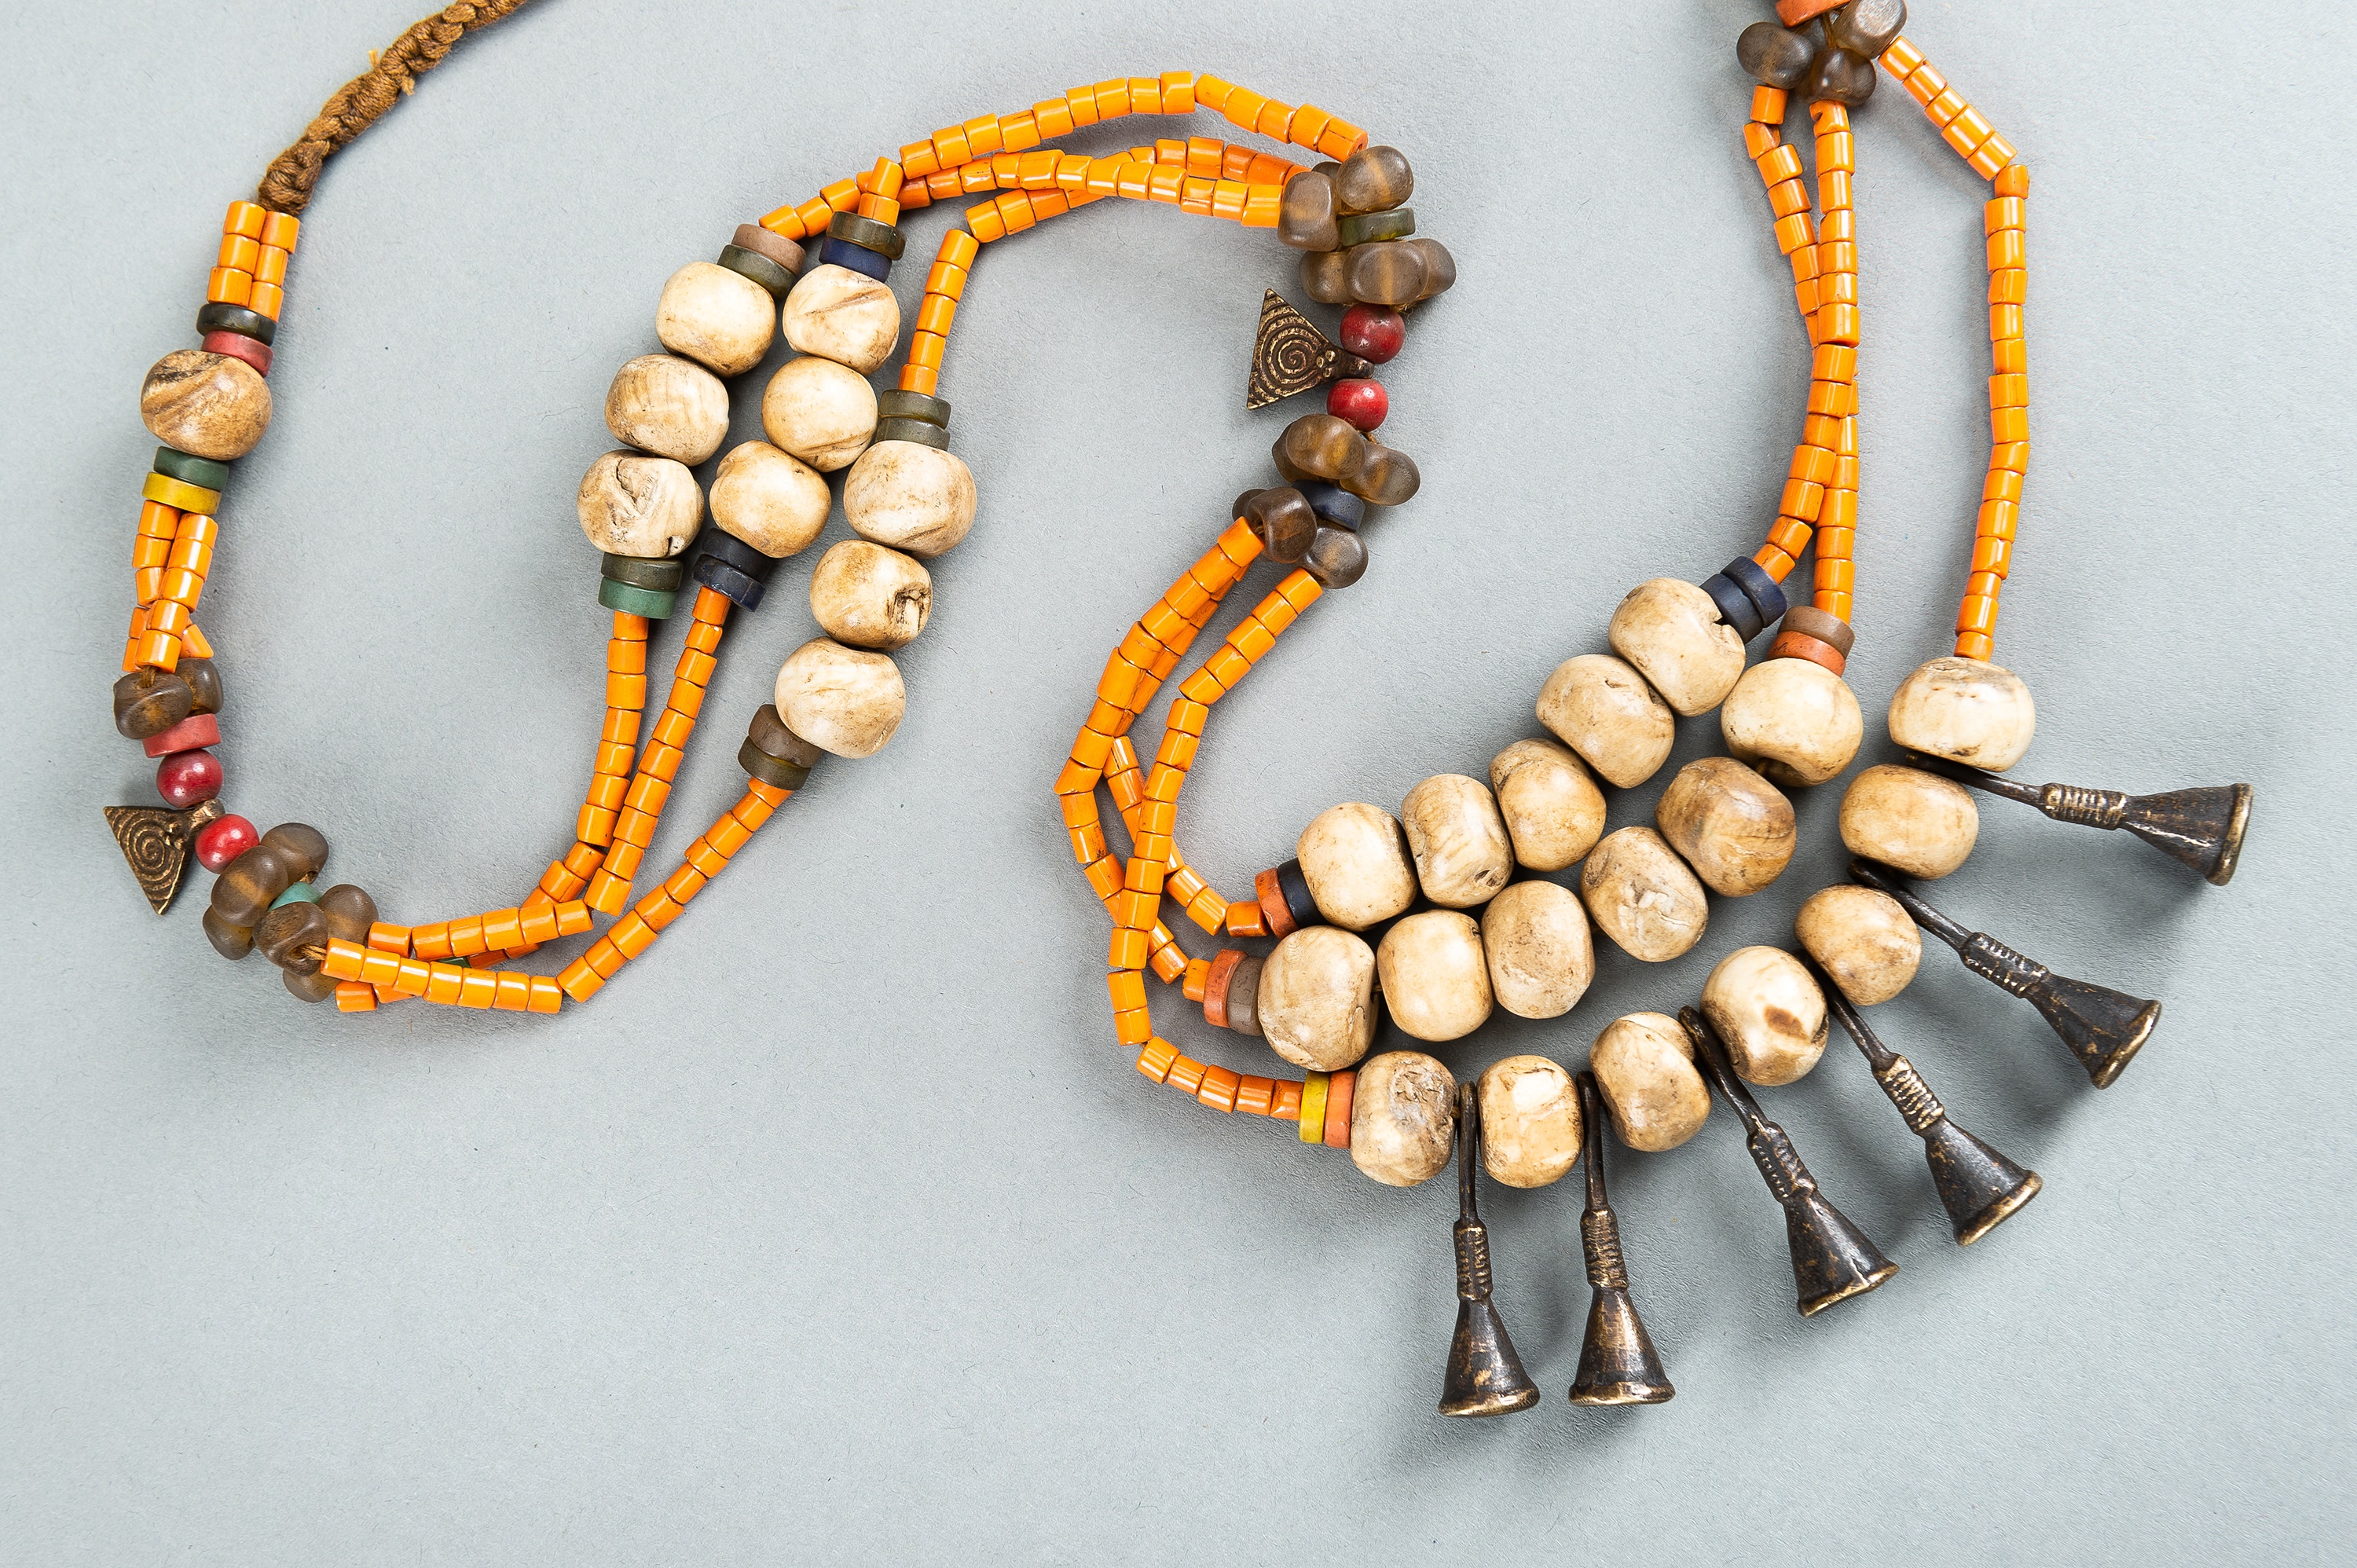 A NAGALAND MULTI-COLORED GLASS, BRASS AND SHELL NECKLACE, c. 1900s - Image 3 of 10